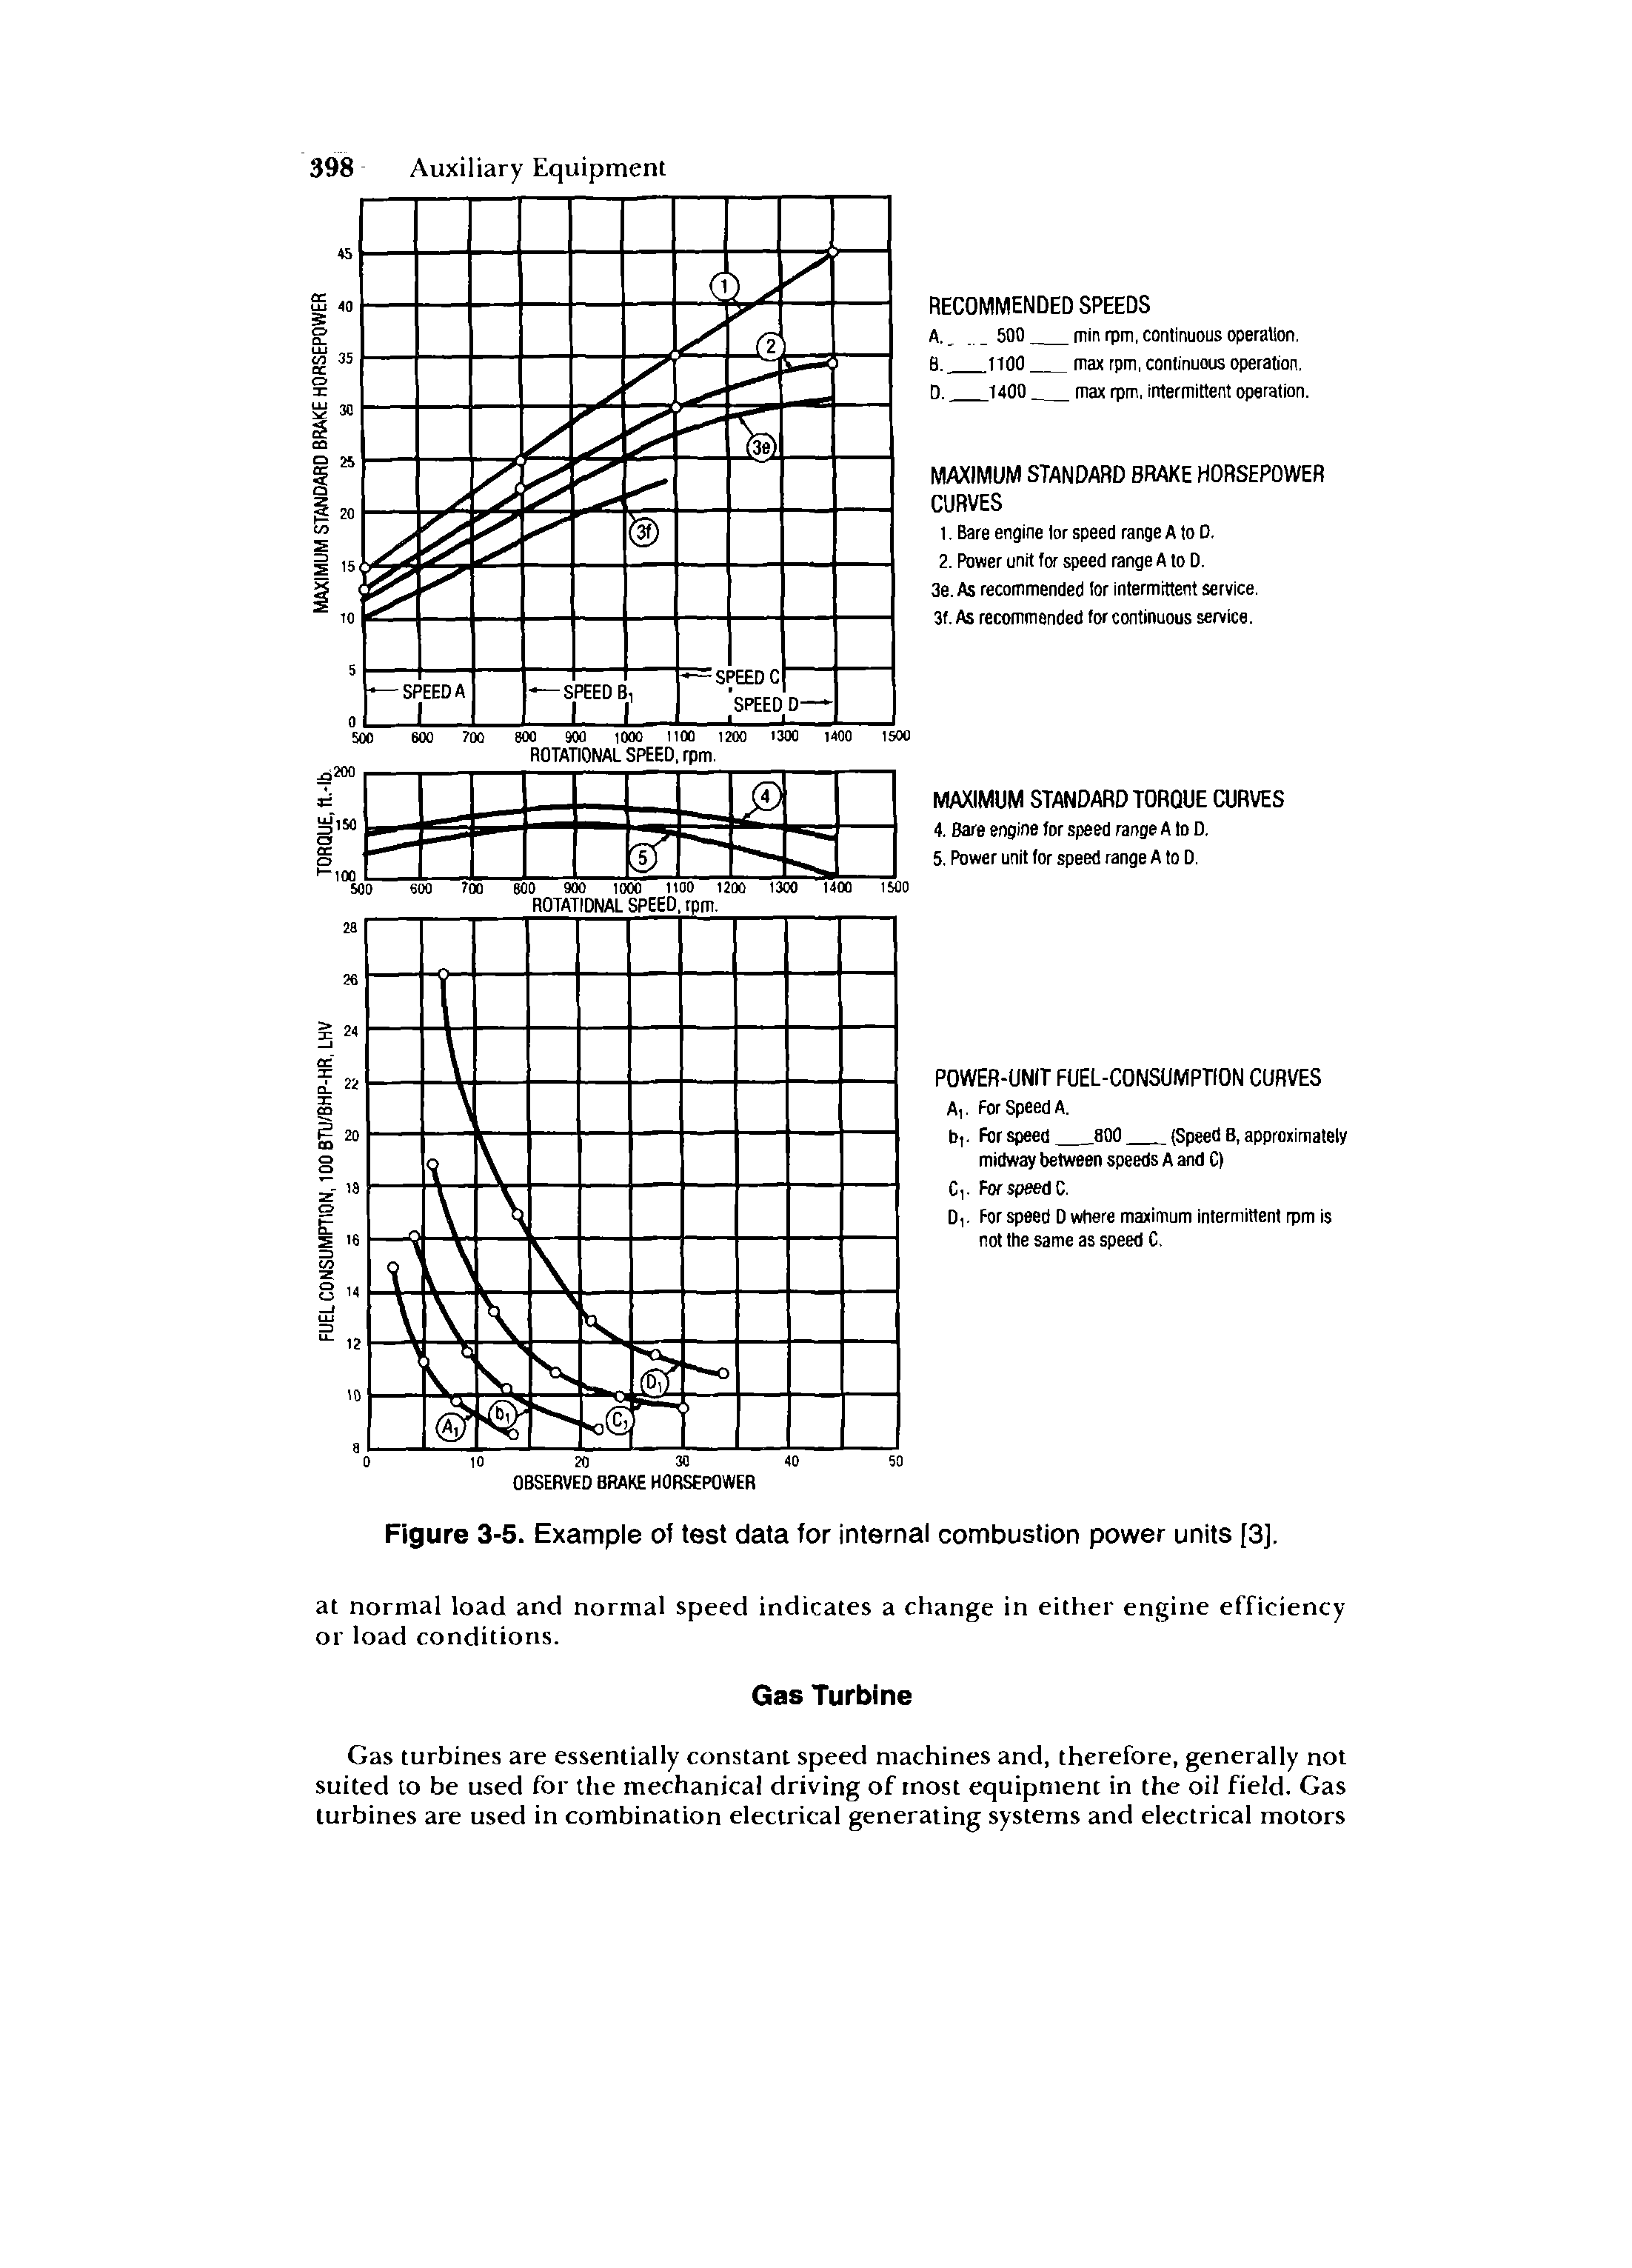 Figure 3-5. Example of test data for internal combustion power units [3].